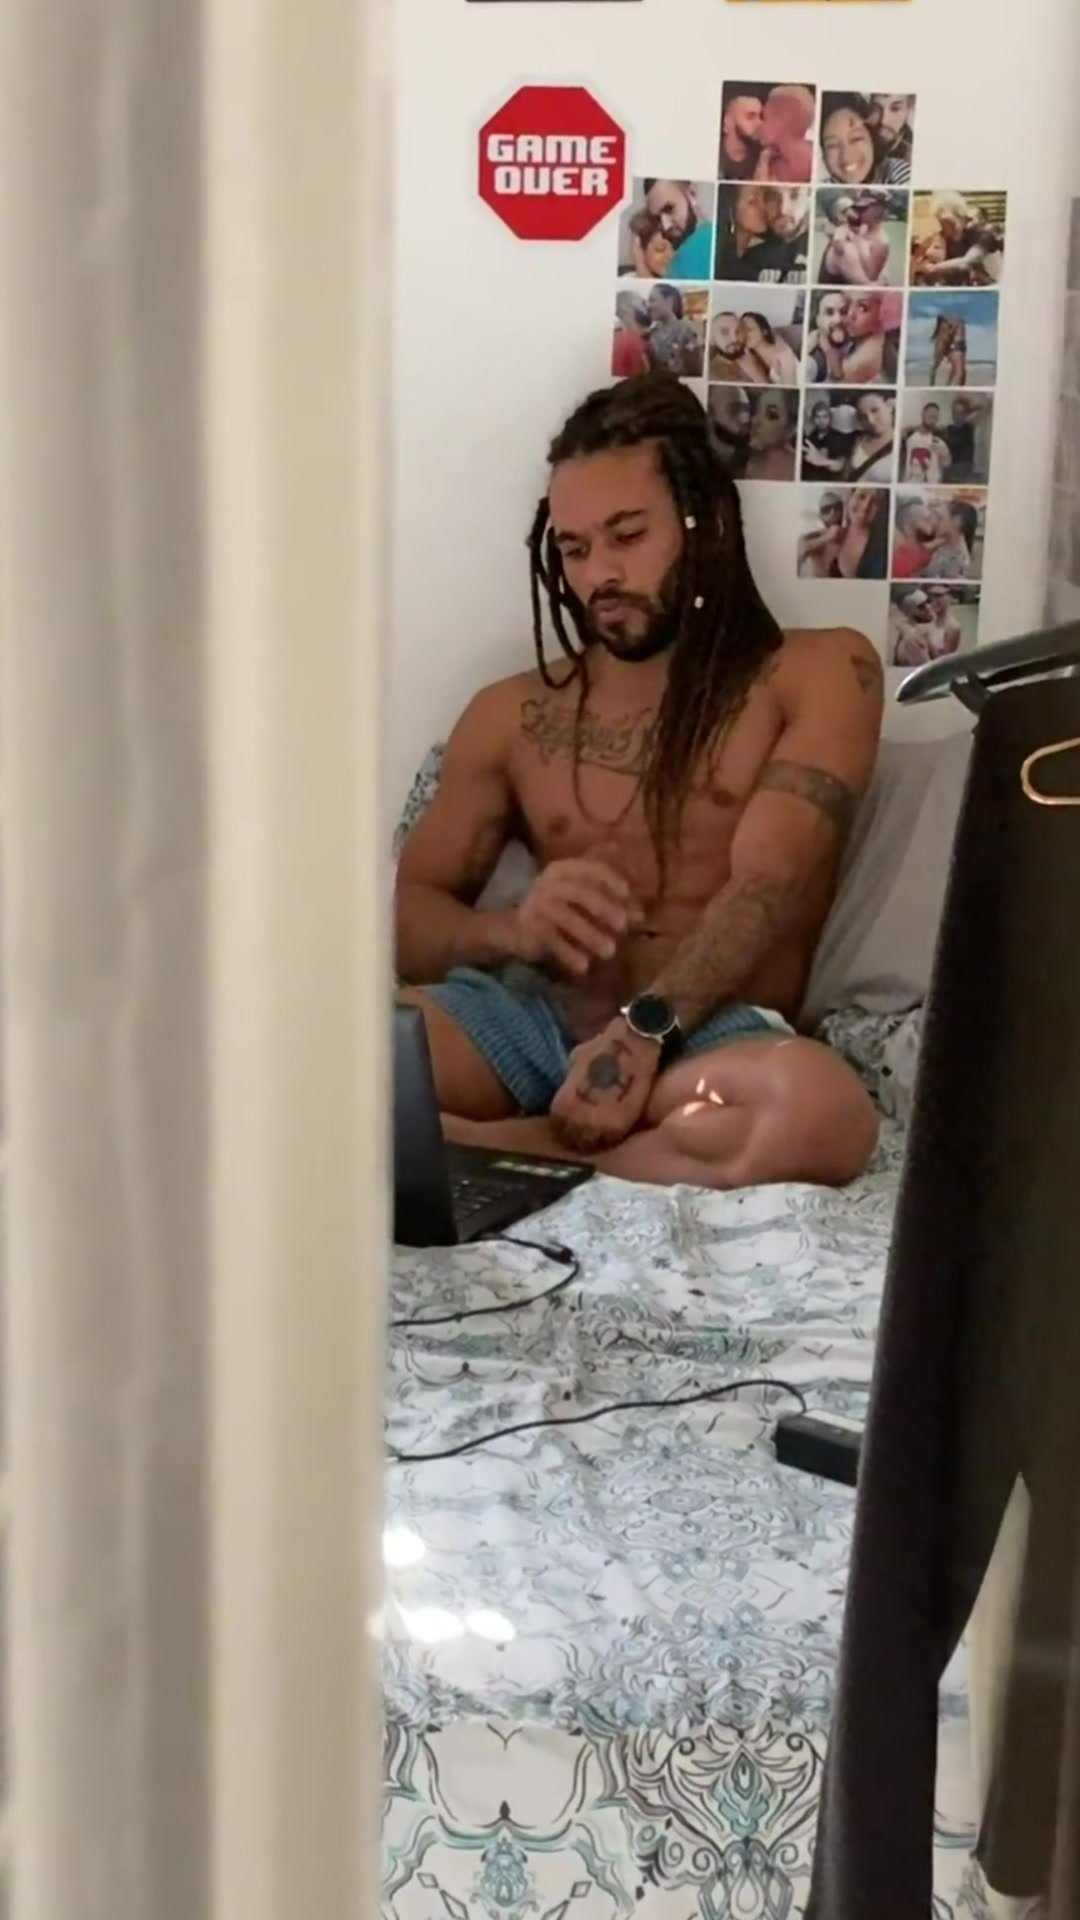 Nude Watching Porn - Long haired man caught jerking off while watching porn - ThisVid.com